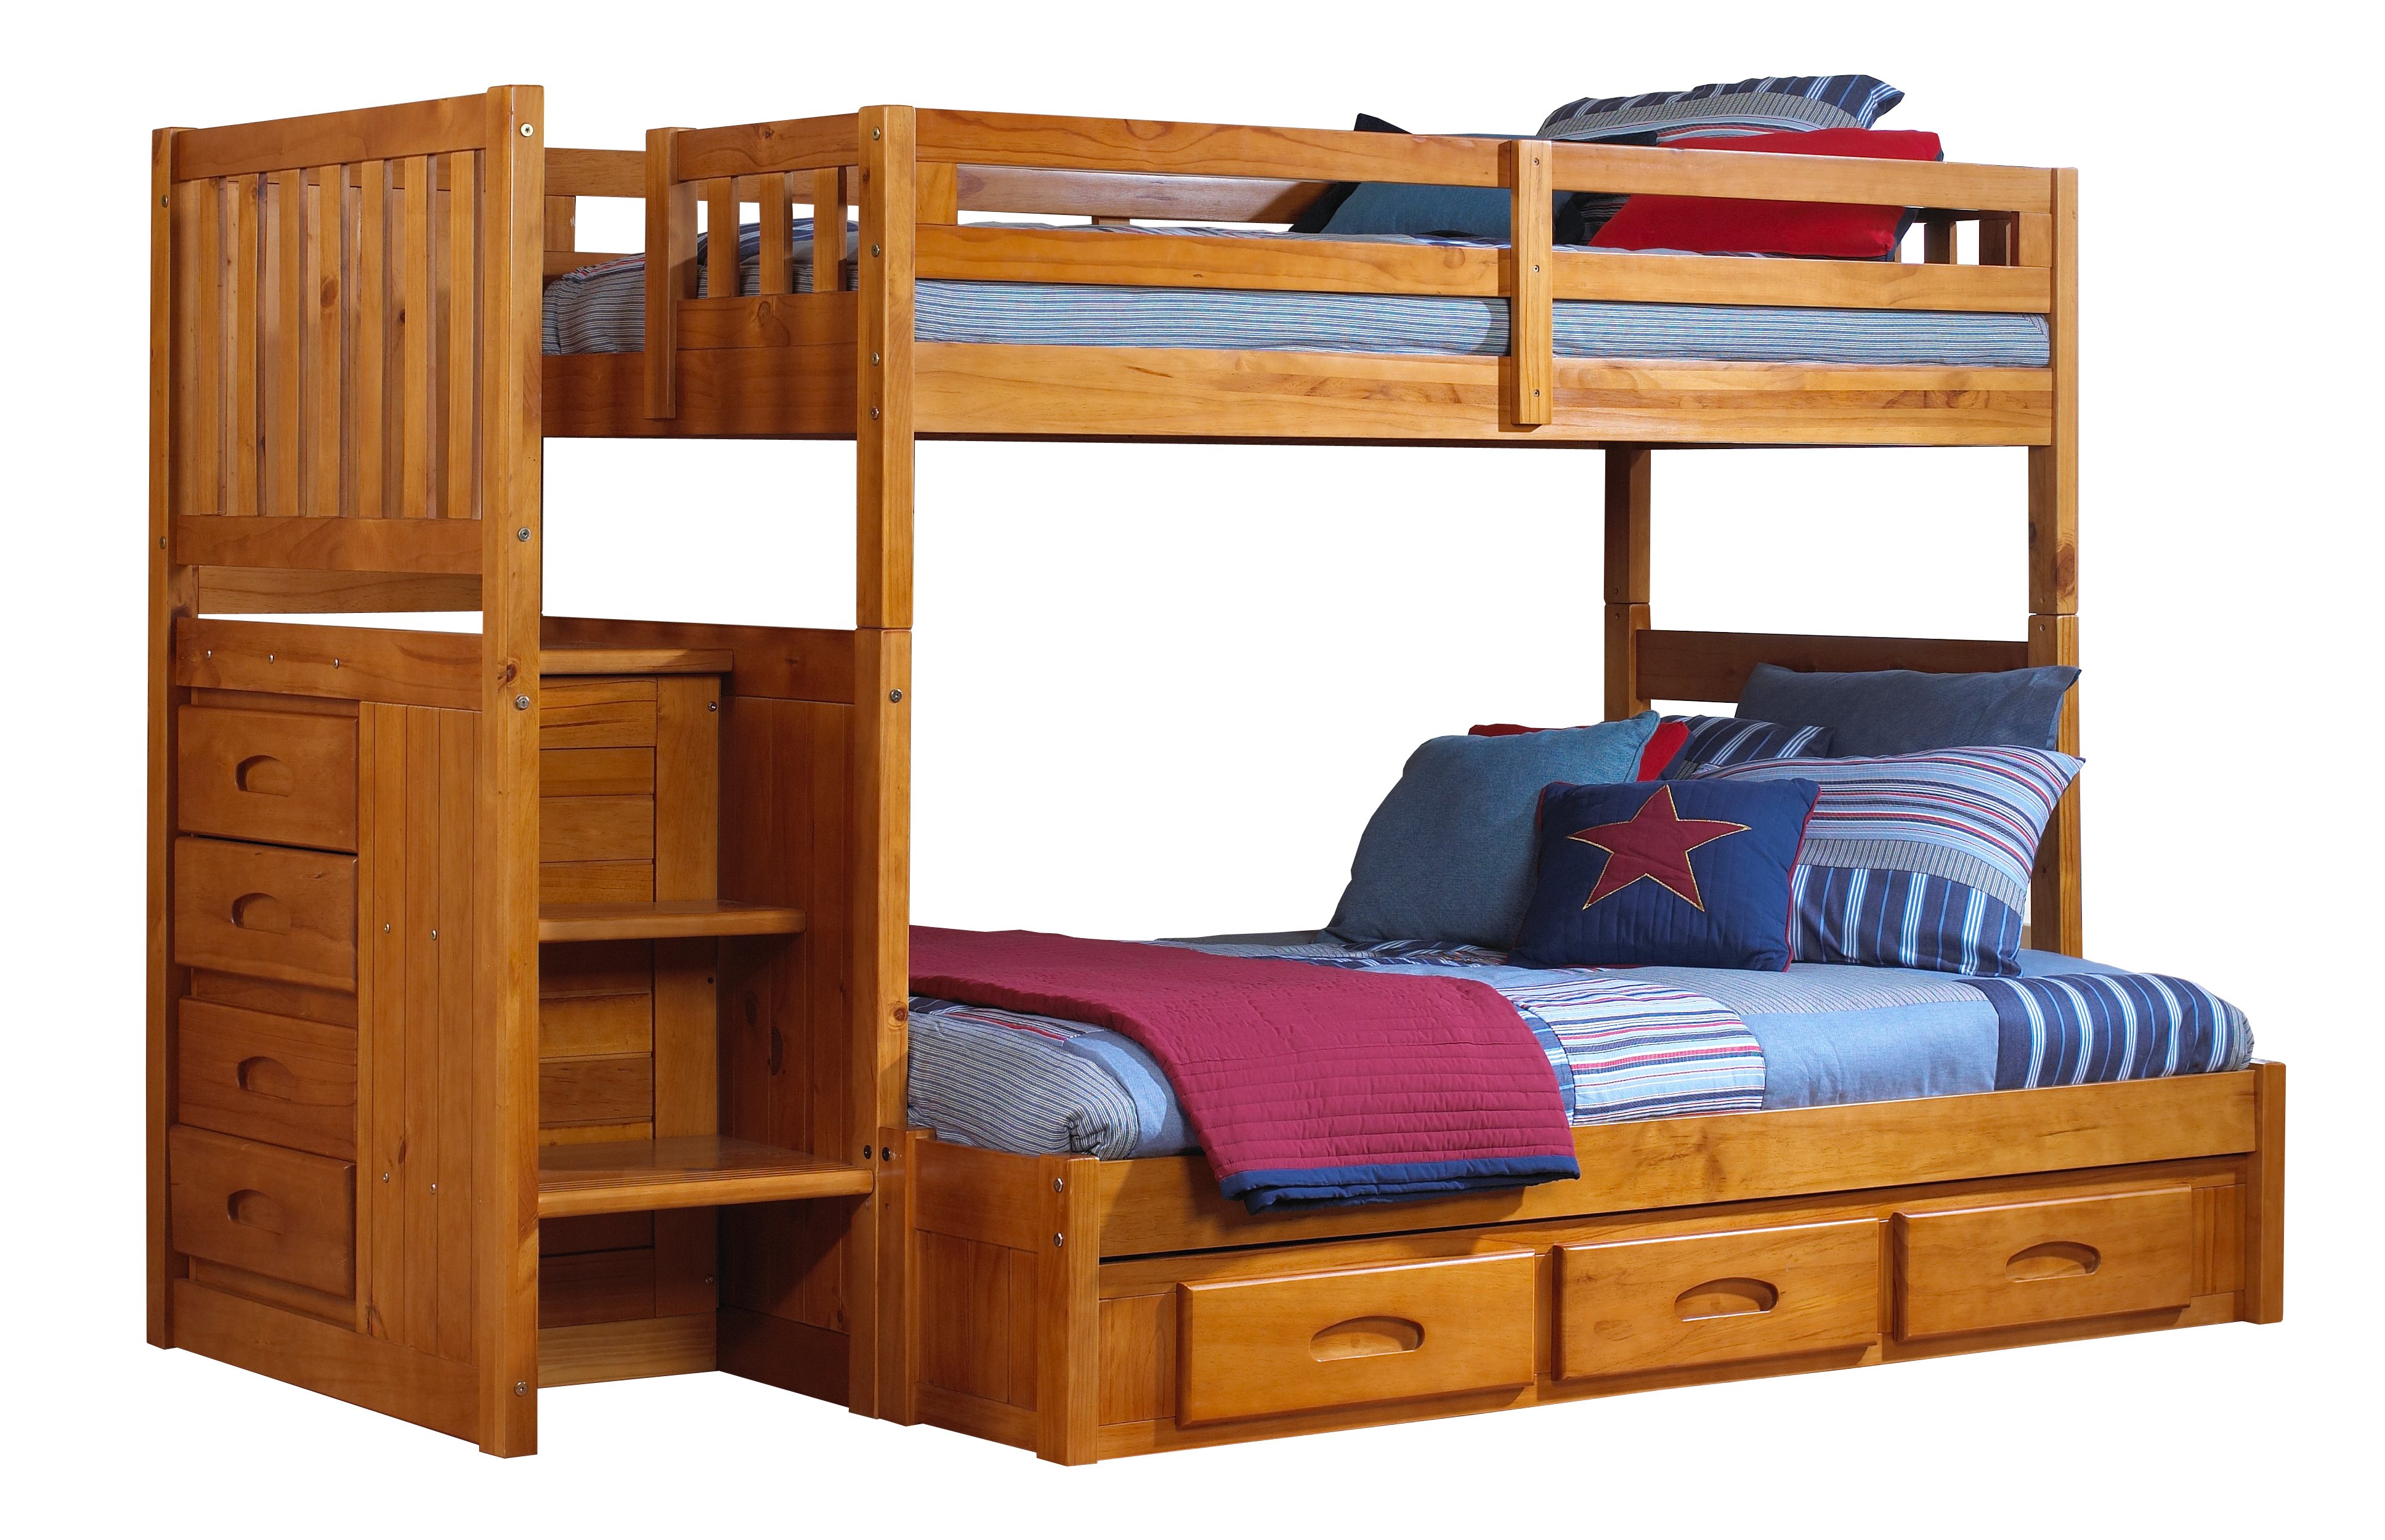 Honey Staircase Bunk Bed, Twin Over Full Bunk Bed Steps